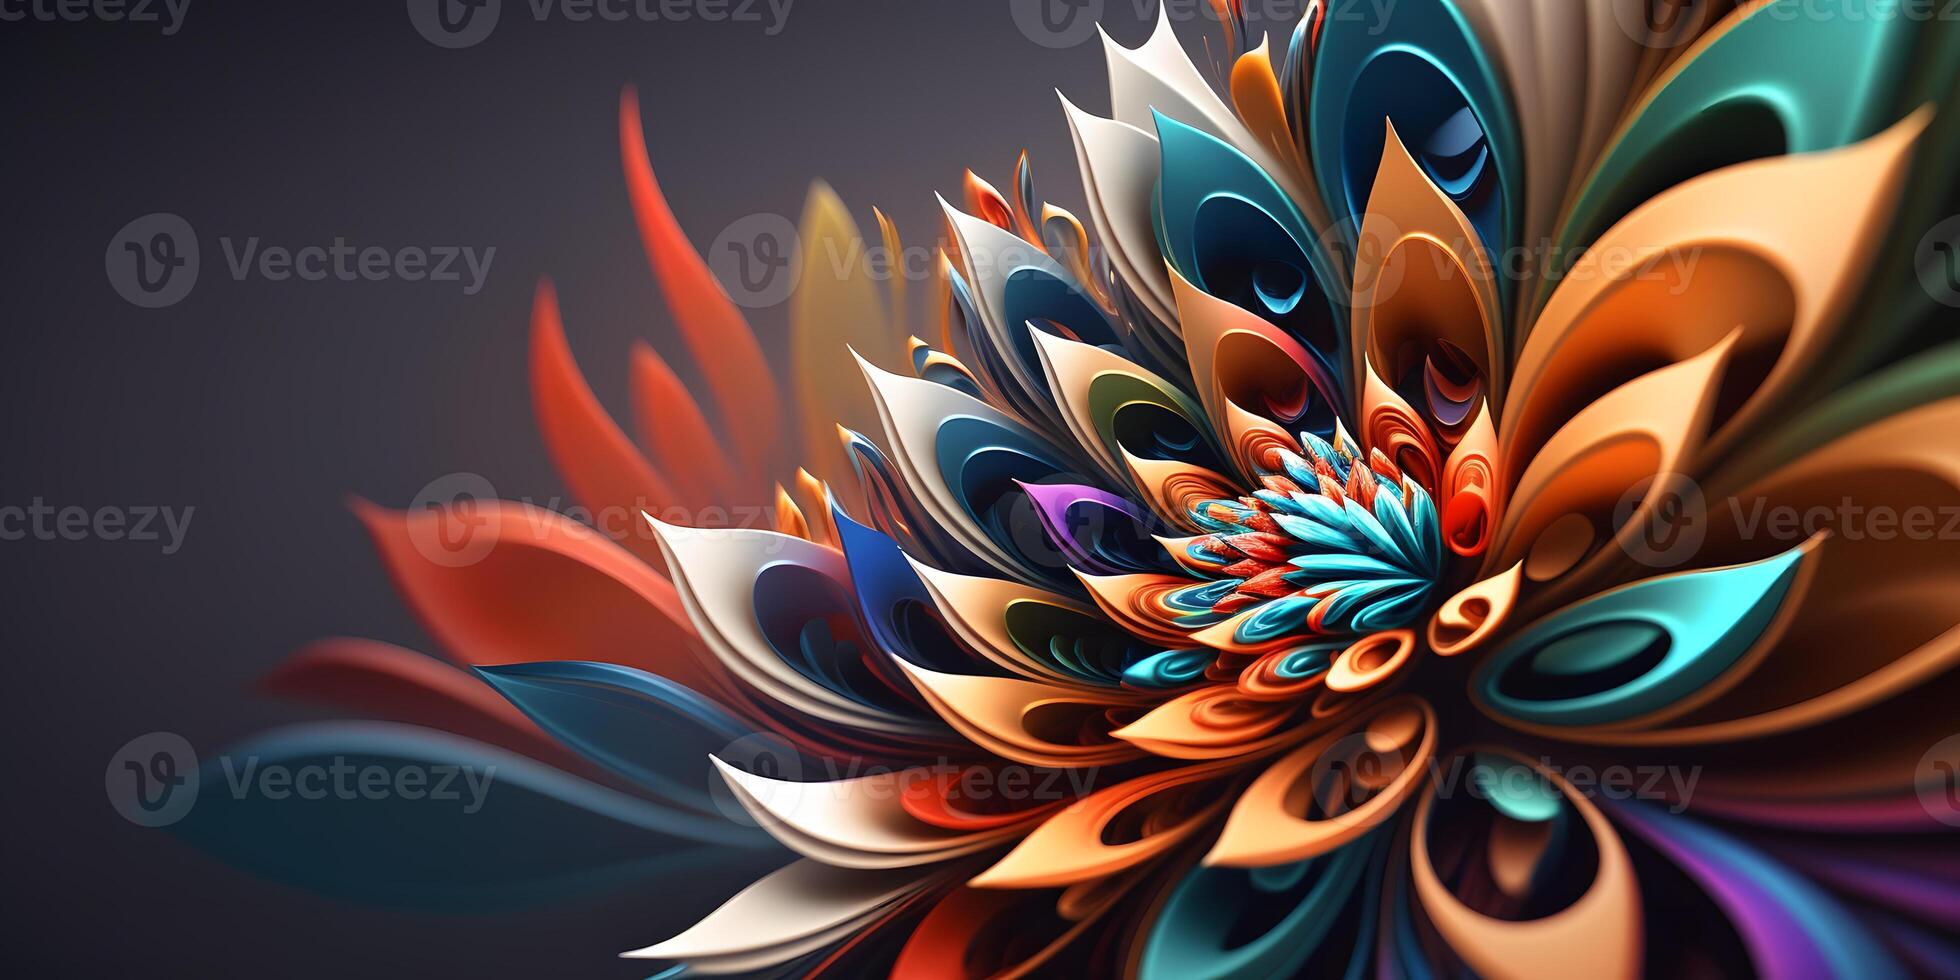 Rainbow Flower 3D Illustration, Colorful Floral Abstract Wallpaper, photo